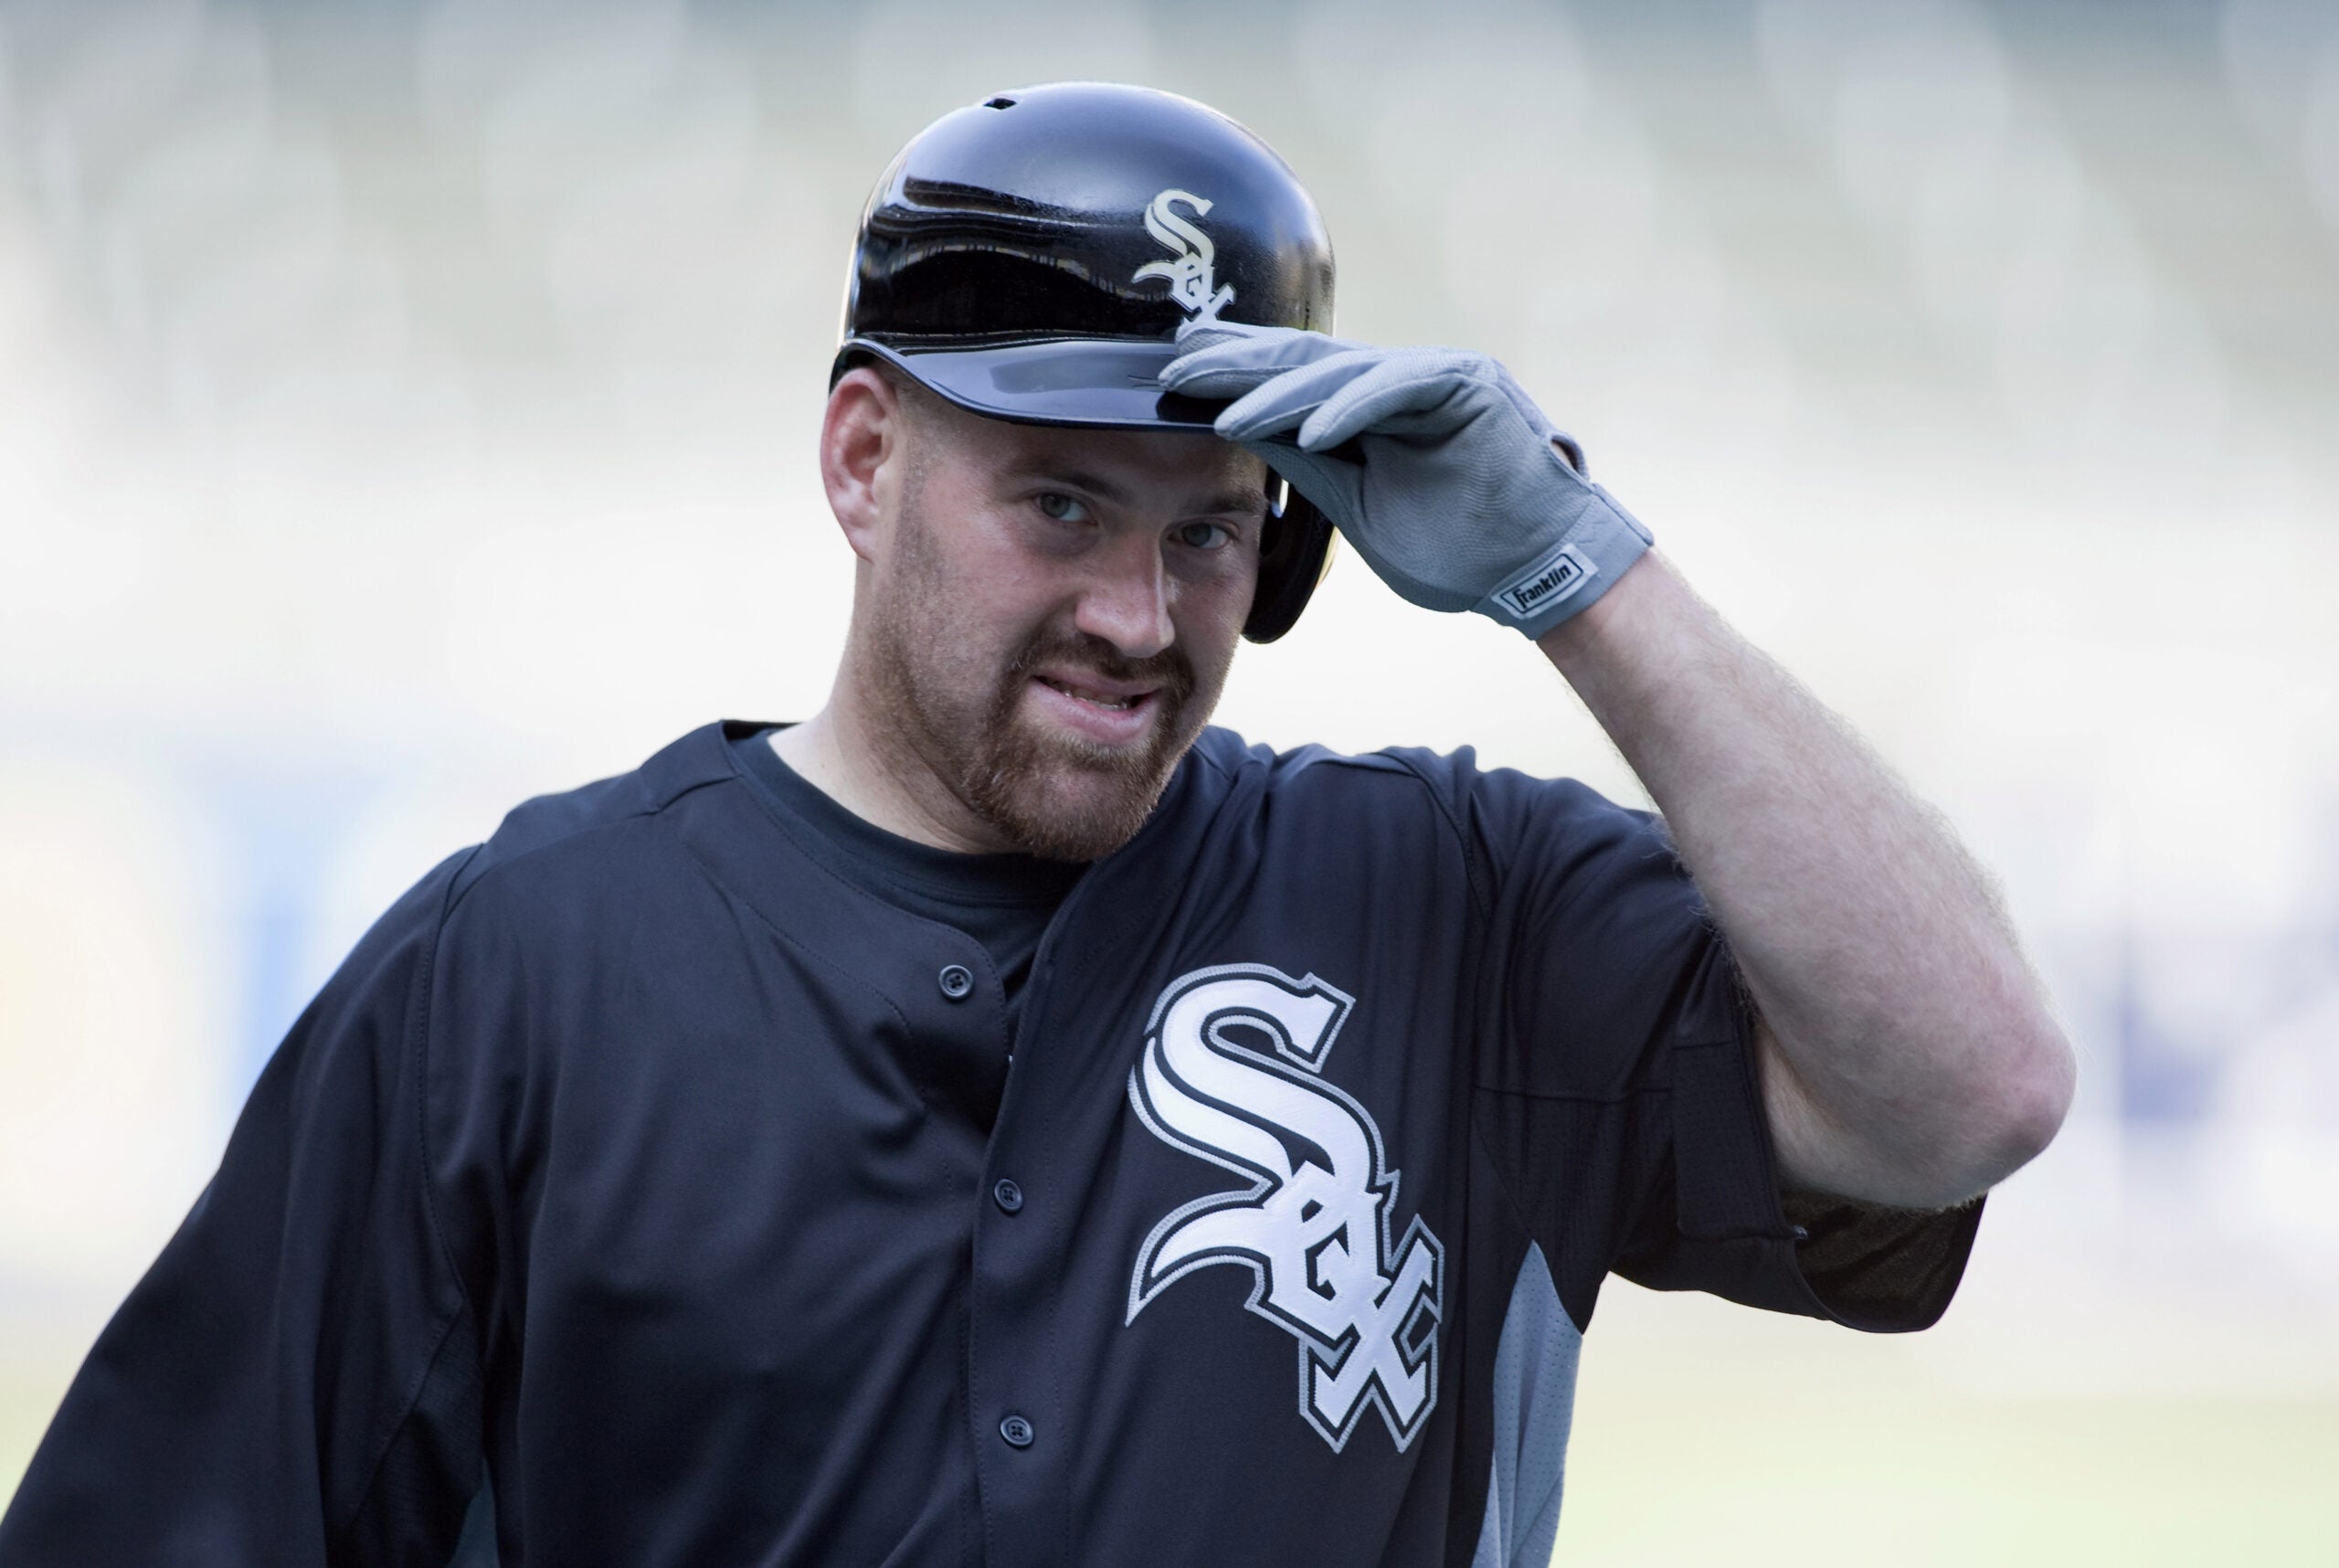 Kevin Youkilis will be Team Israel's hitting coach in 2023 World